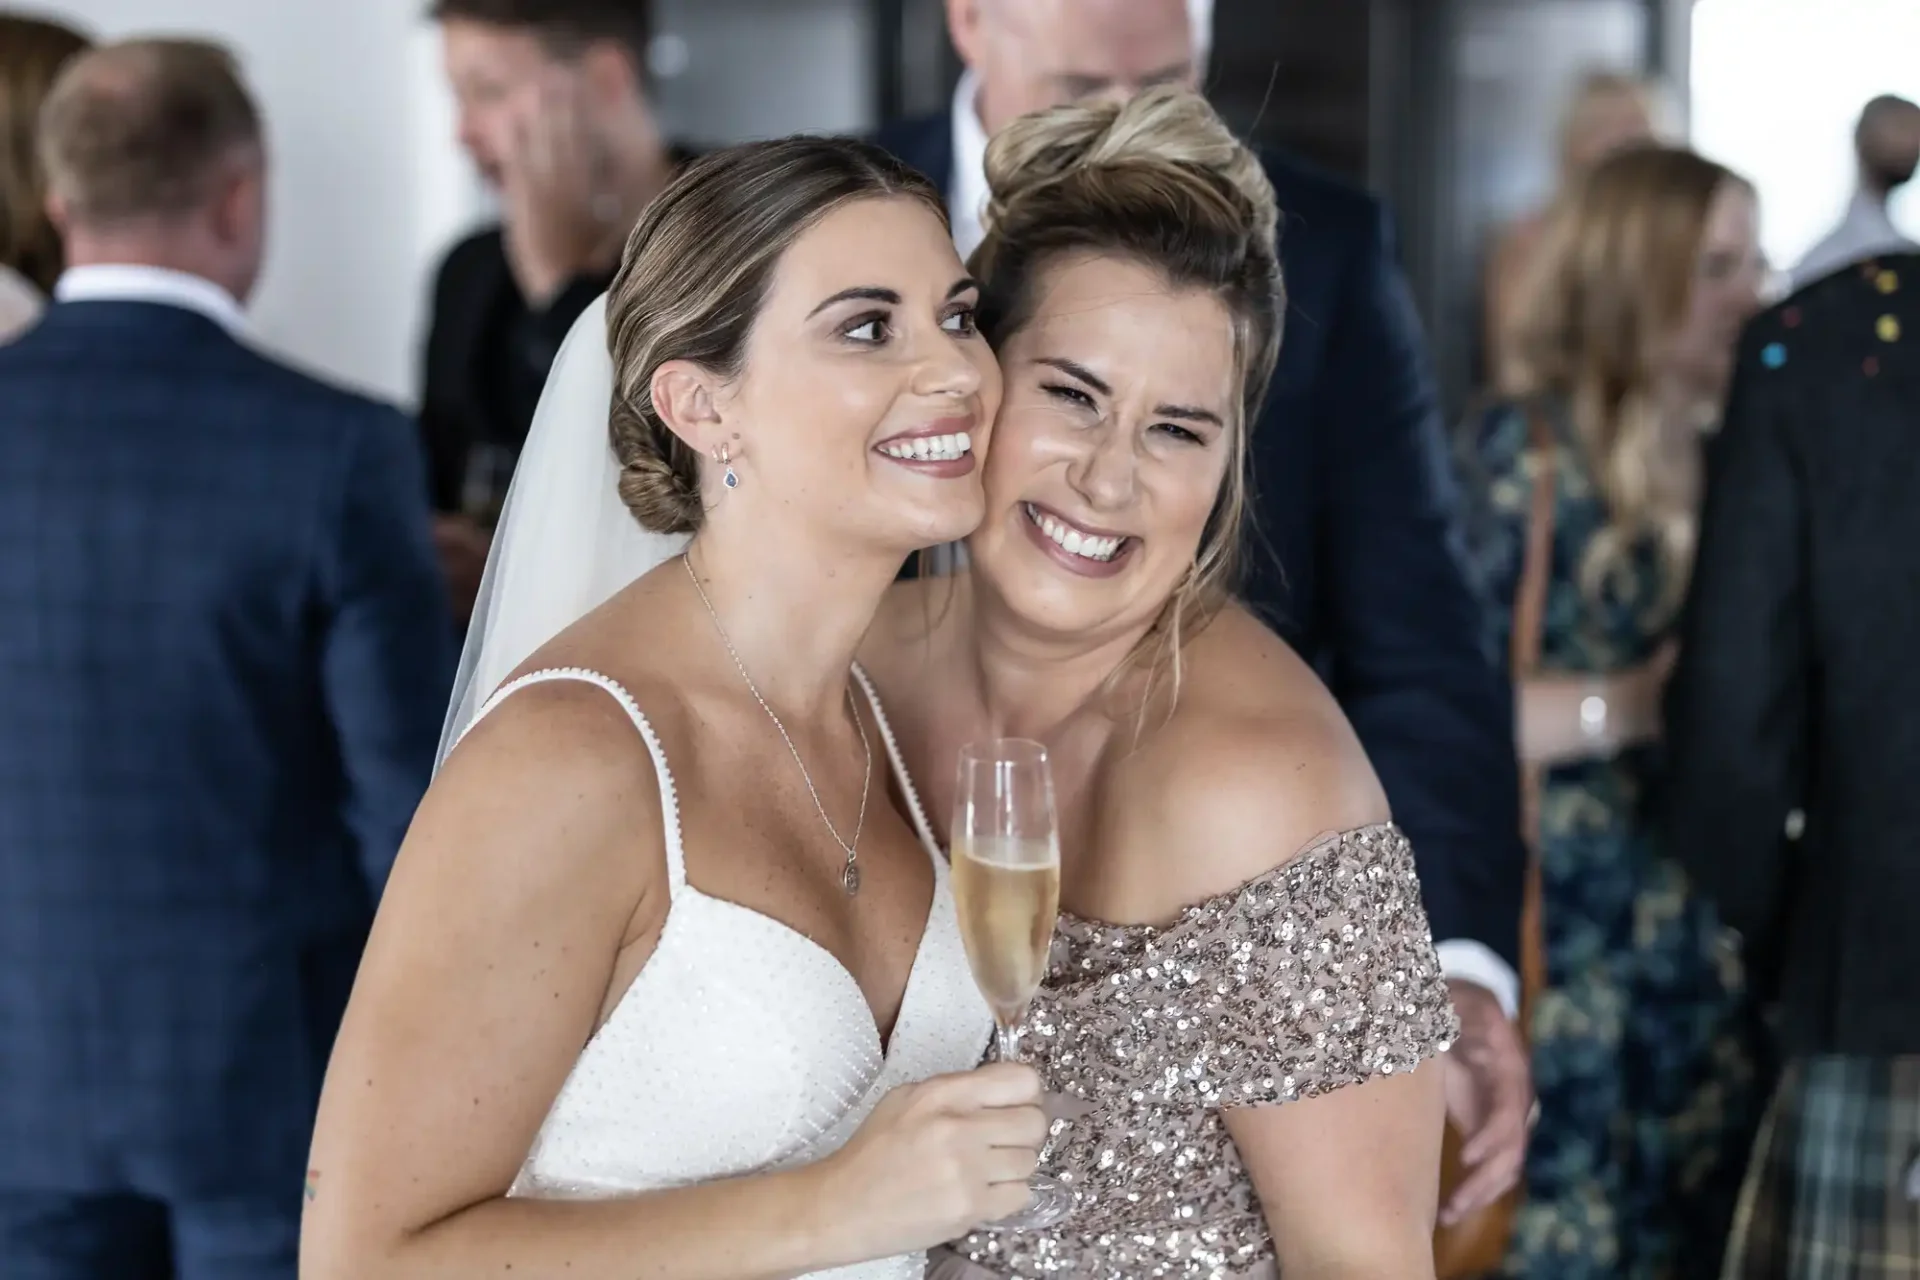 Two women smiling and embracing at a wedding celebration, one in a white bridal gown and the other in a sequined dress, holding a champagne flute.